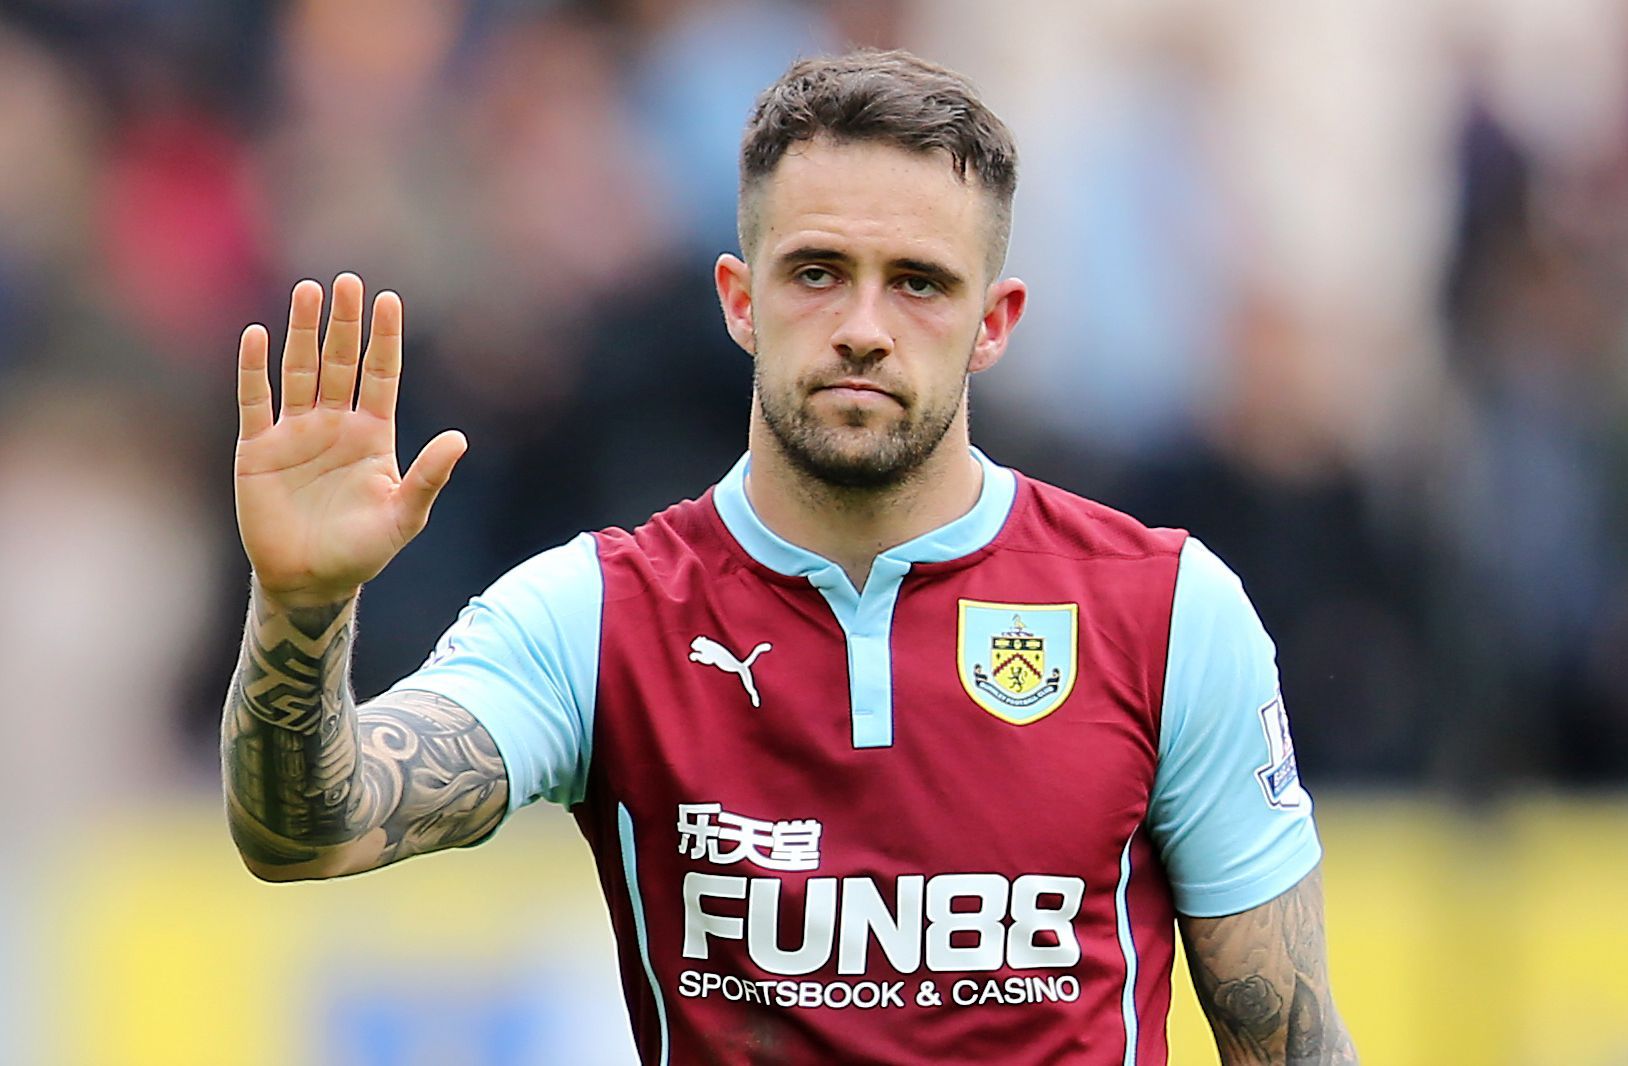 Football: Danny Ings of Burnley waves to fans at the end of the game